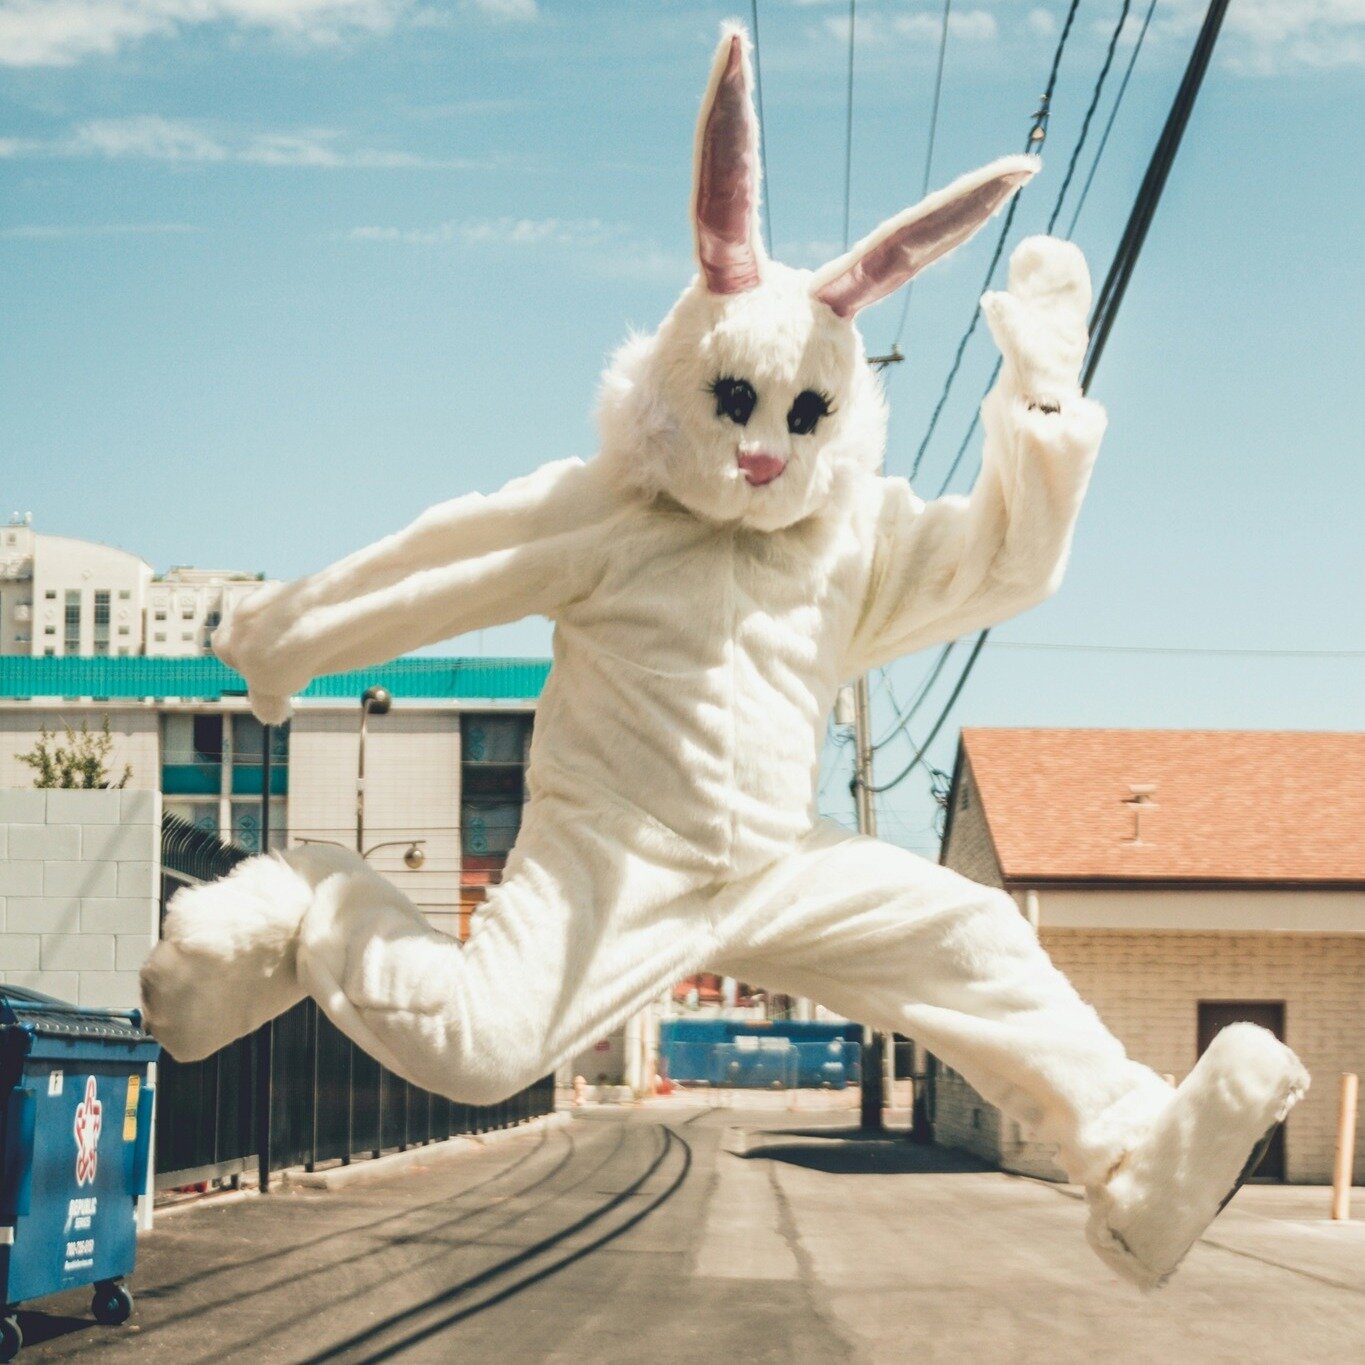 Just one day left for our Easter offer!

Leap into action by clicking the link!

https://www.buildmyconfidence.net/management

#managementdevelopment #leadershipdevelopment #leadershiptraining #managerdevelopment #growyourown #leadershipskills #manag